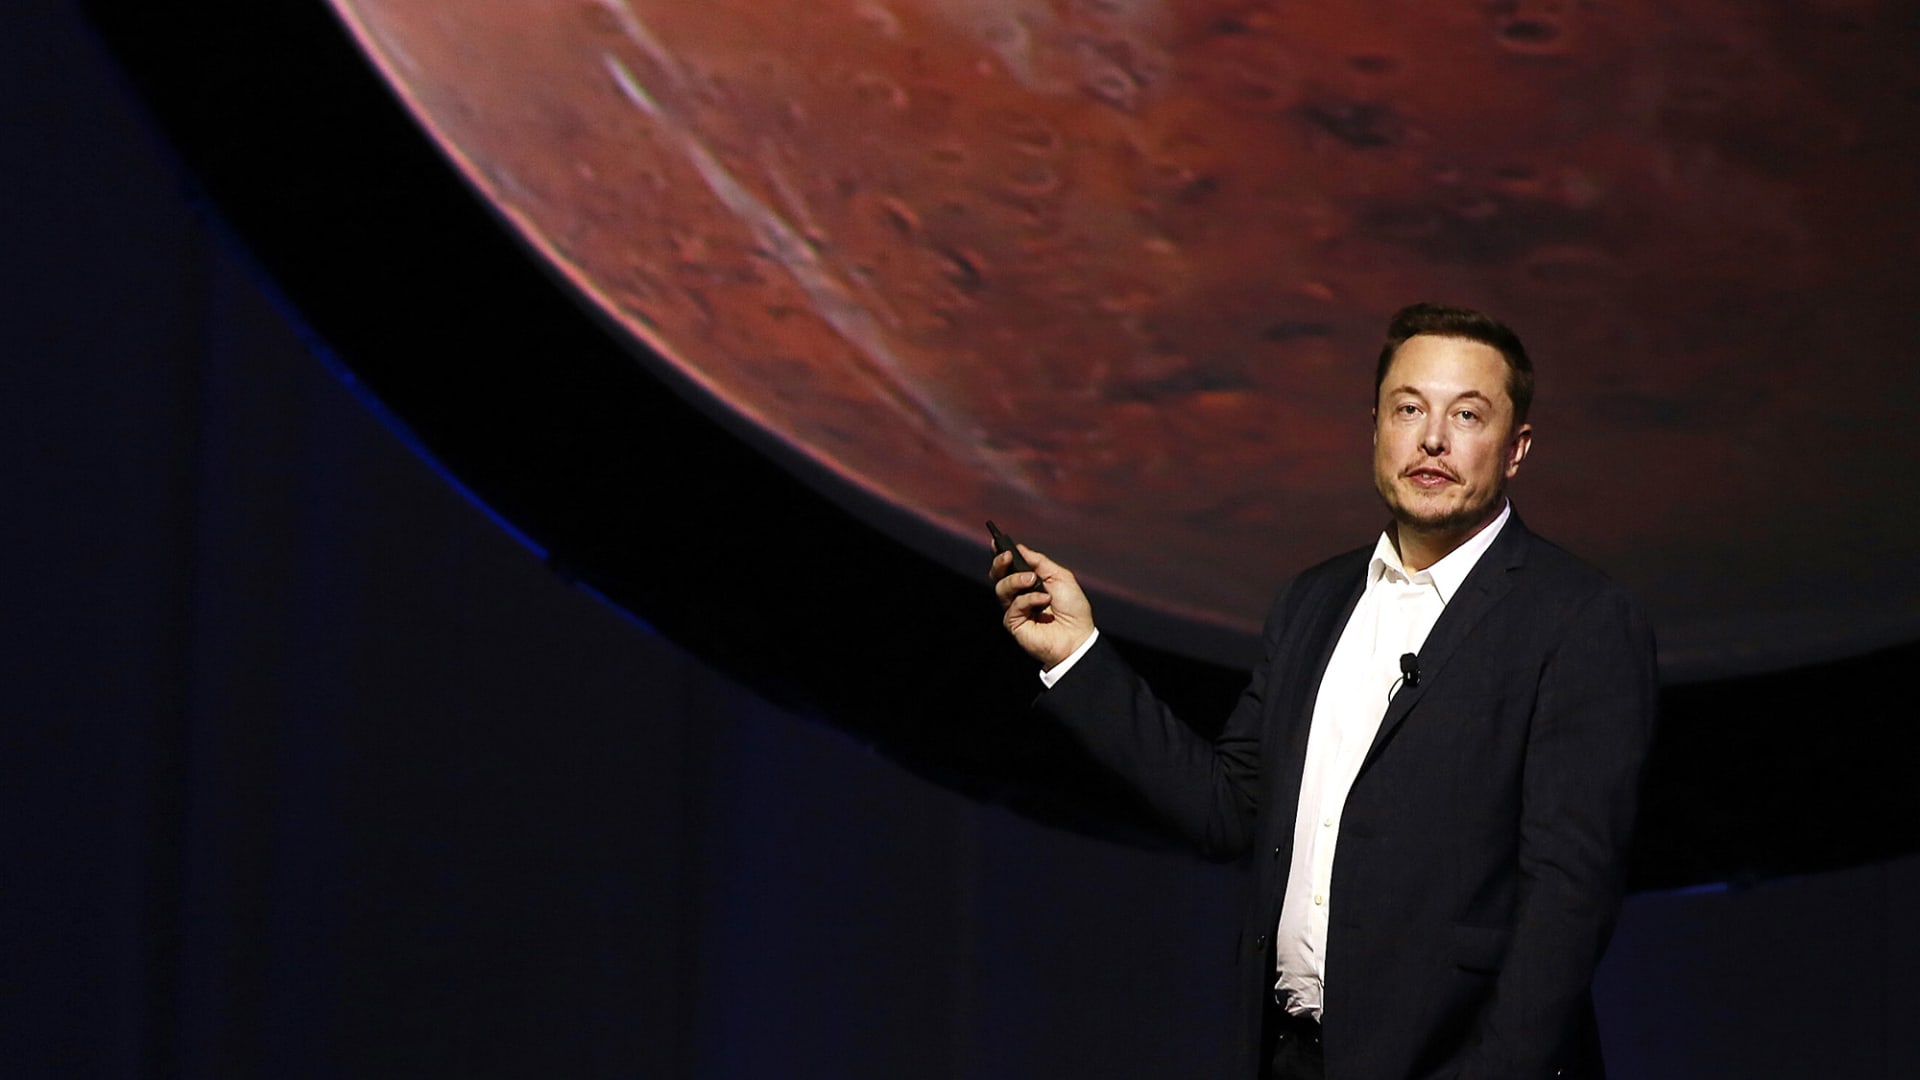 Bill Gates says Elon Musk's ambition to colonize Mars is not a good use of money